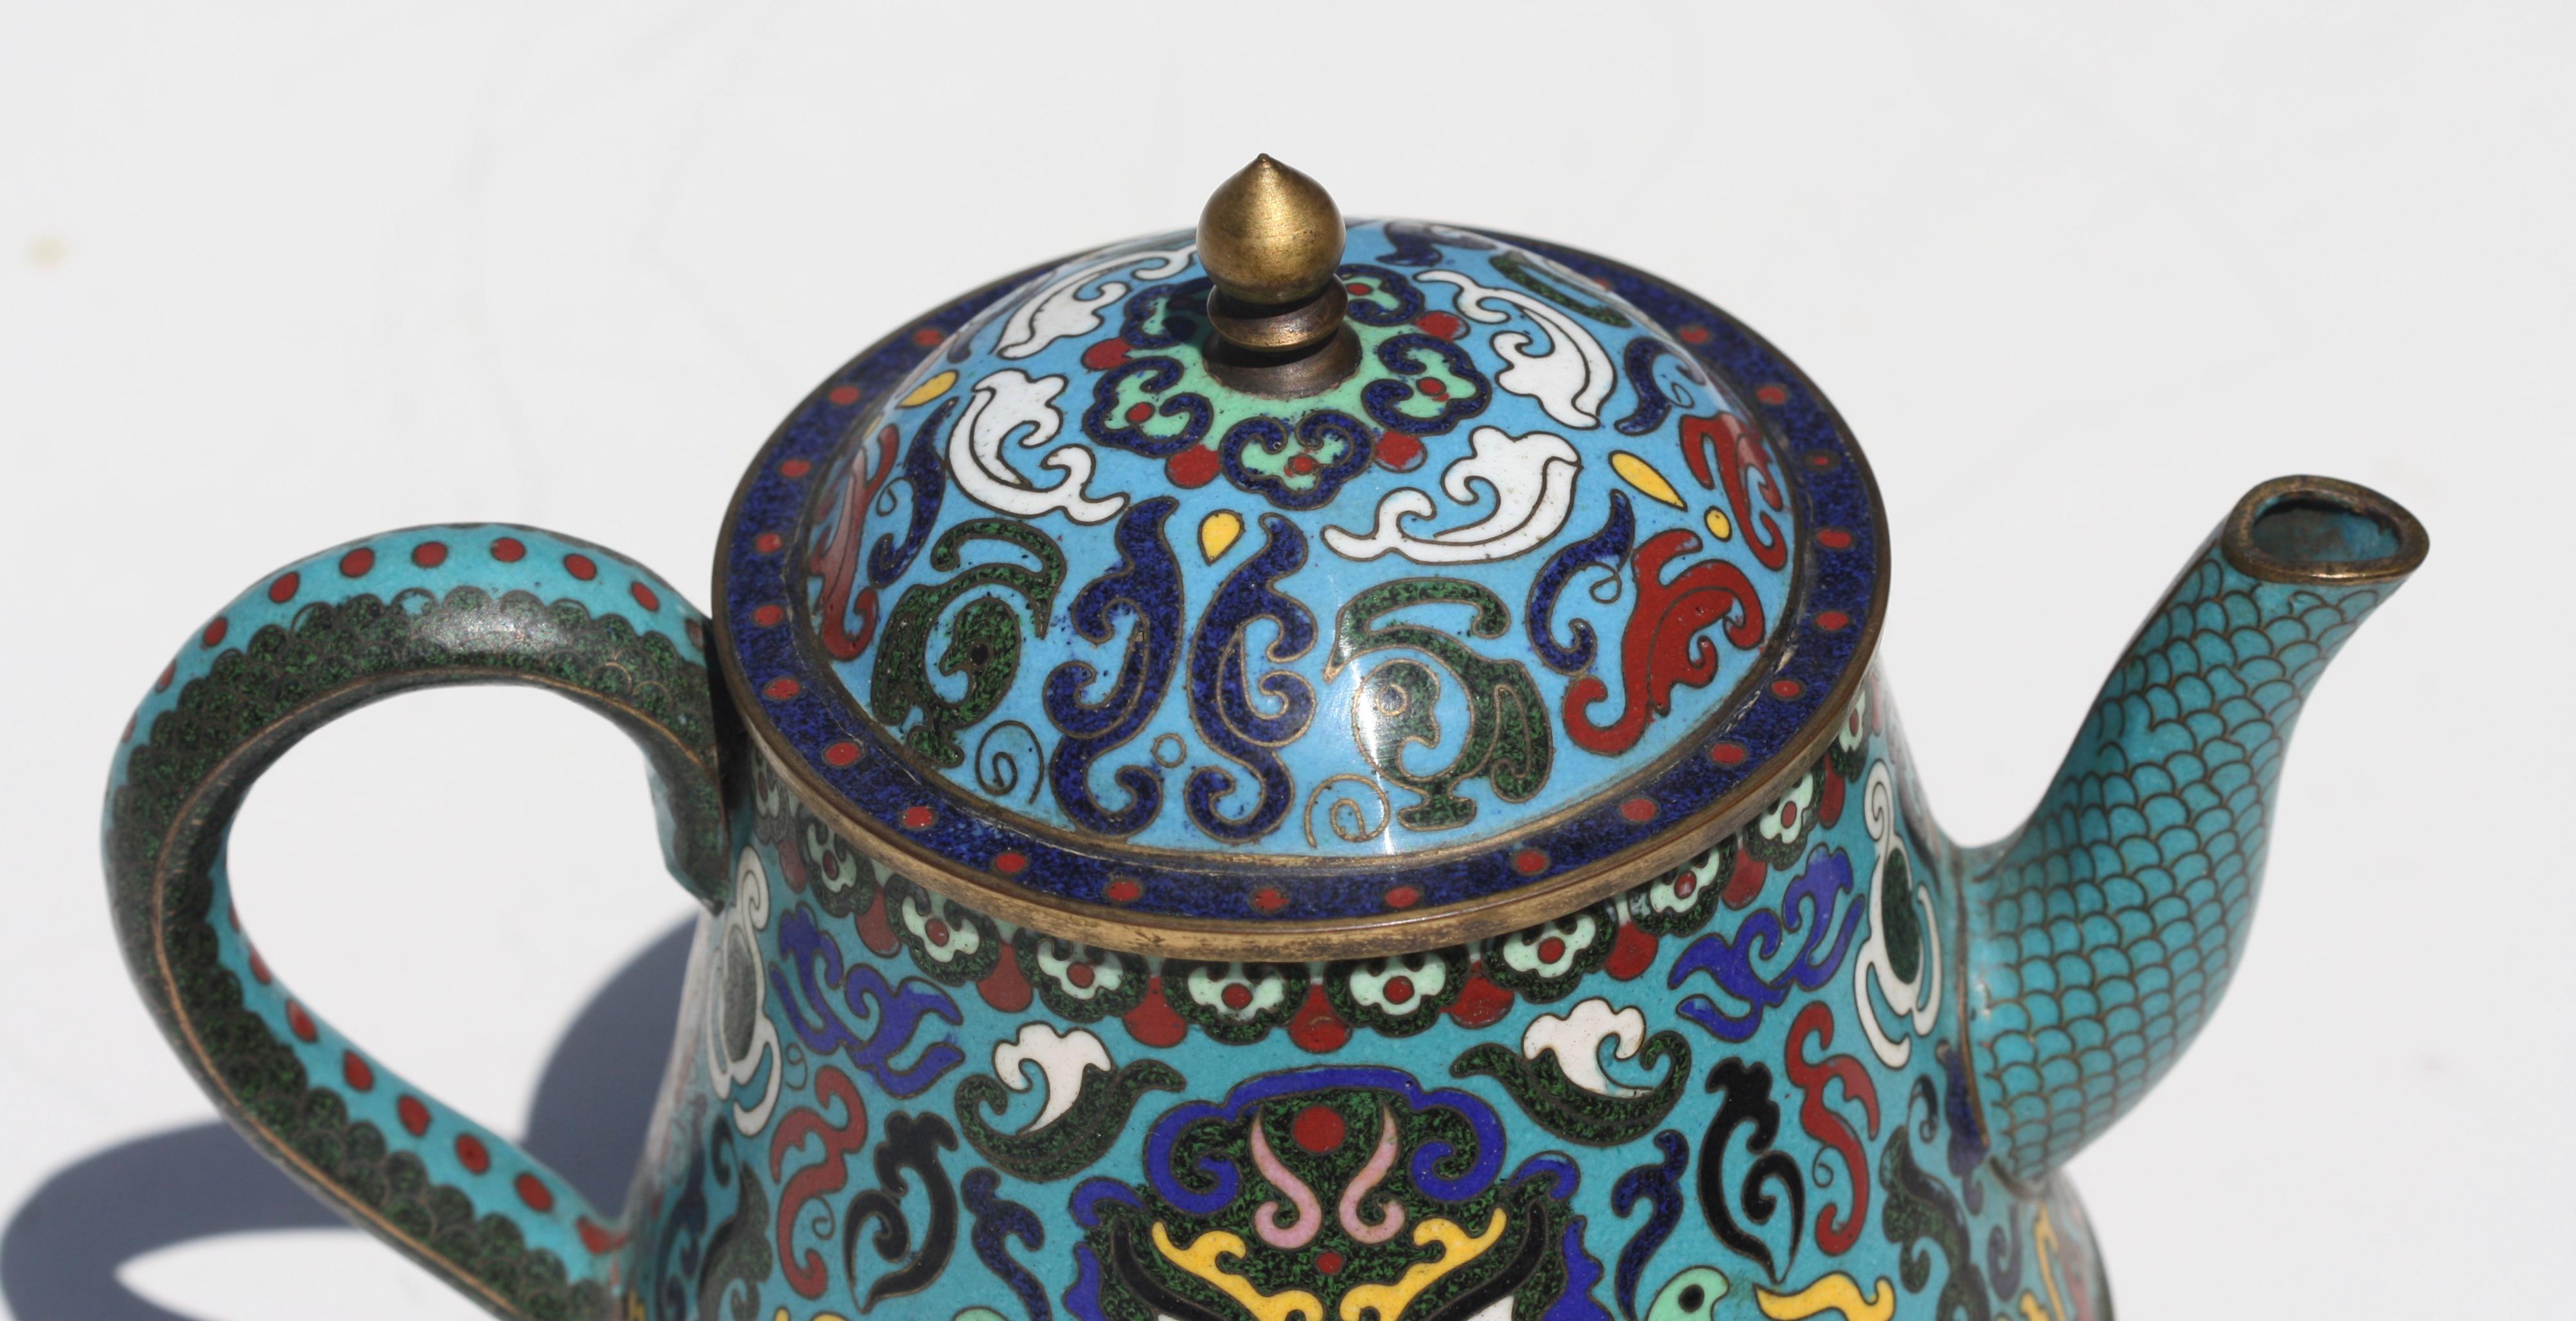 A Chinese cloisonné enamel teapot and cover, 20th century
gilt-decorated and enamelled with shuangxi characters and lotus flowers wreathed by dense foliage
Measures: Height 5.5 in. (13.97 cm.), 
Width 6.75 in. (17.14 cm.), 
Depth 4.25 in. (10.79